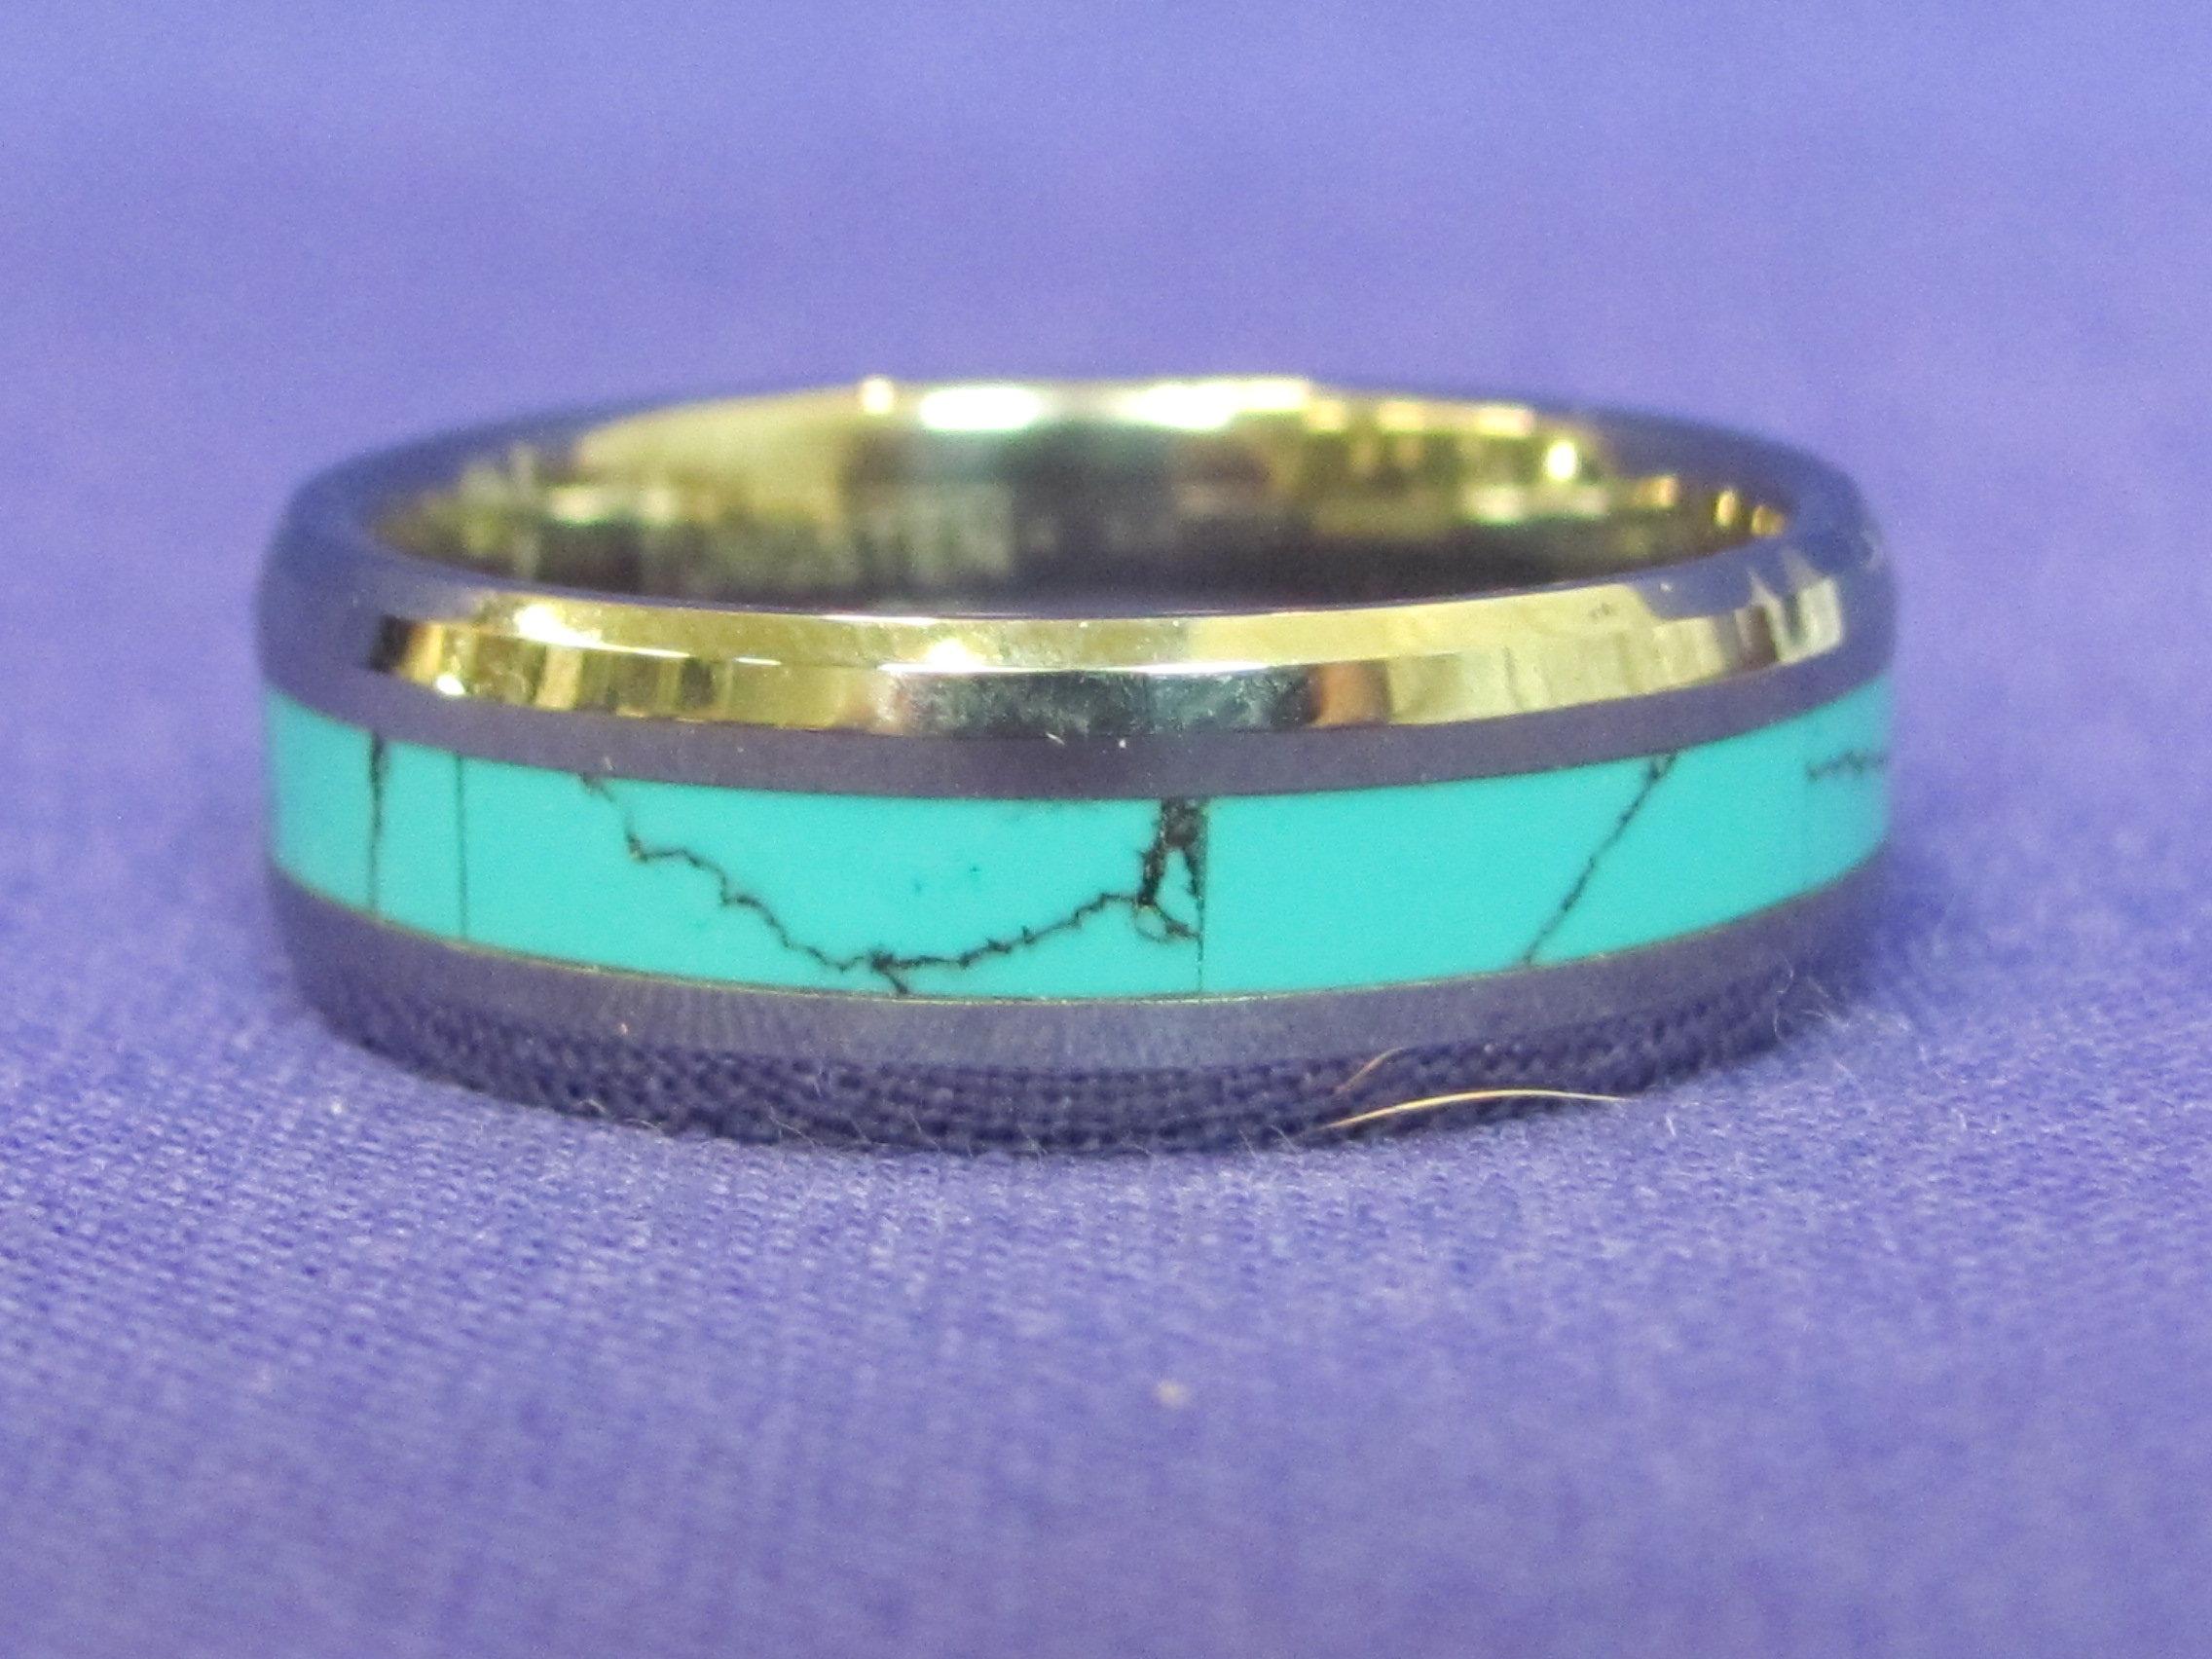 Tungsten Band Ring w Inlaid Faux Turquoise – Size 14.5 – Very good condition